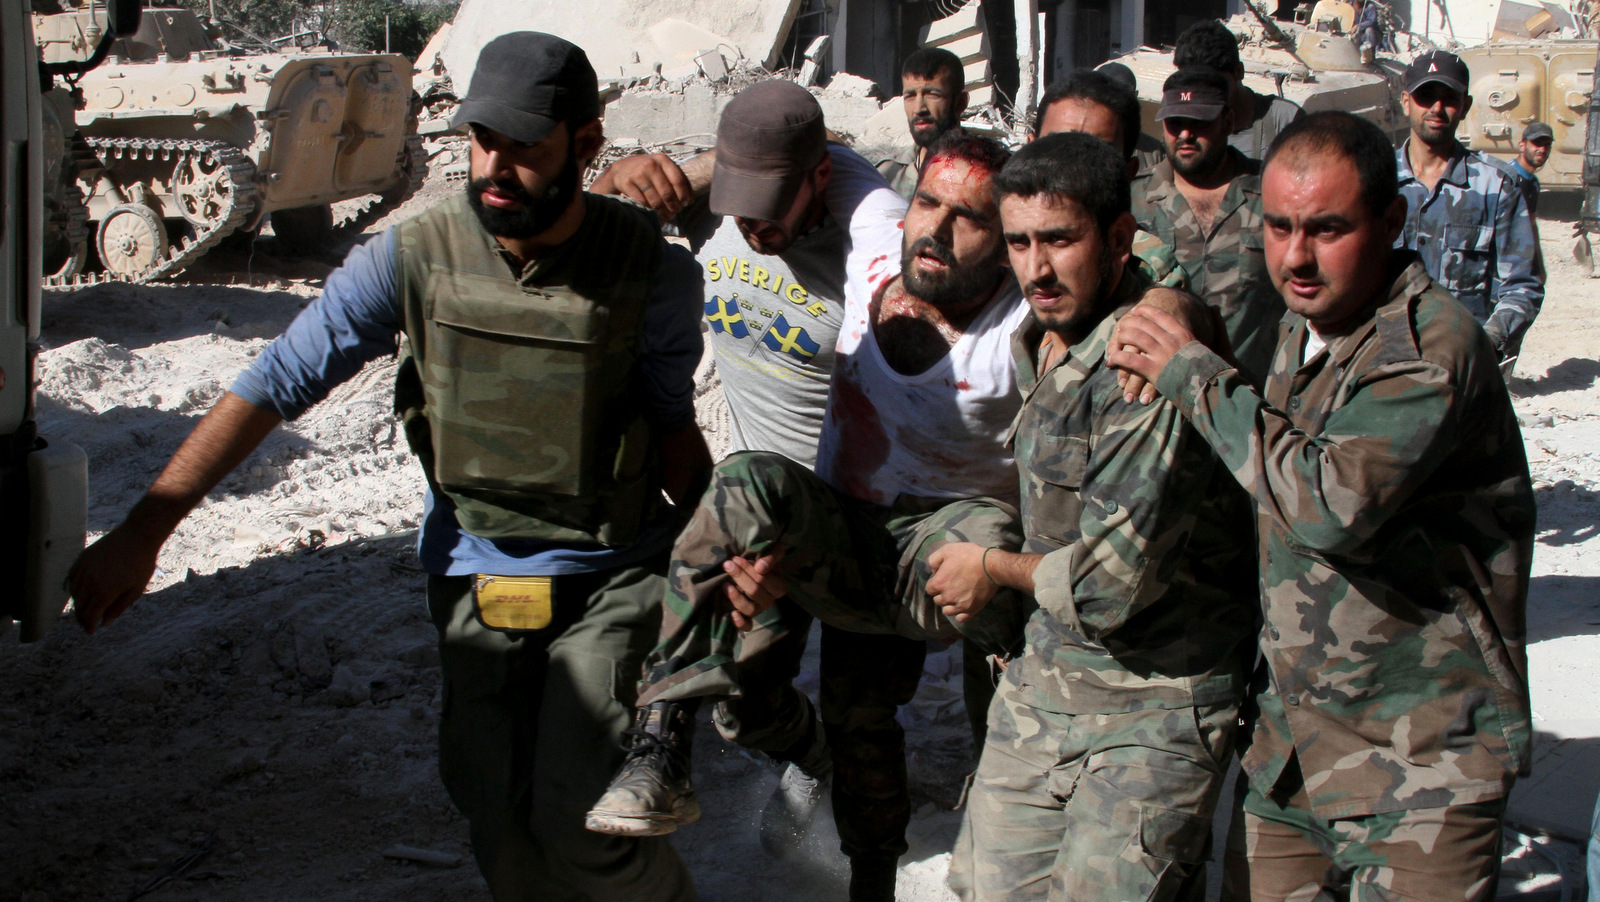 Syrian army soldiers evacuate a comrade injured during heavy clashes with Syrian rebels in the Jobar neighborhood of Damascus, Syria, Saturday, Aug. 24, 2013. (AP Photo)